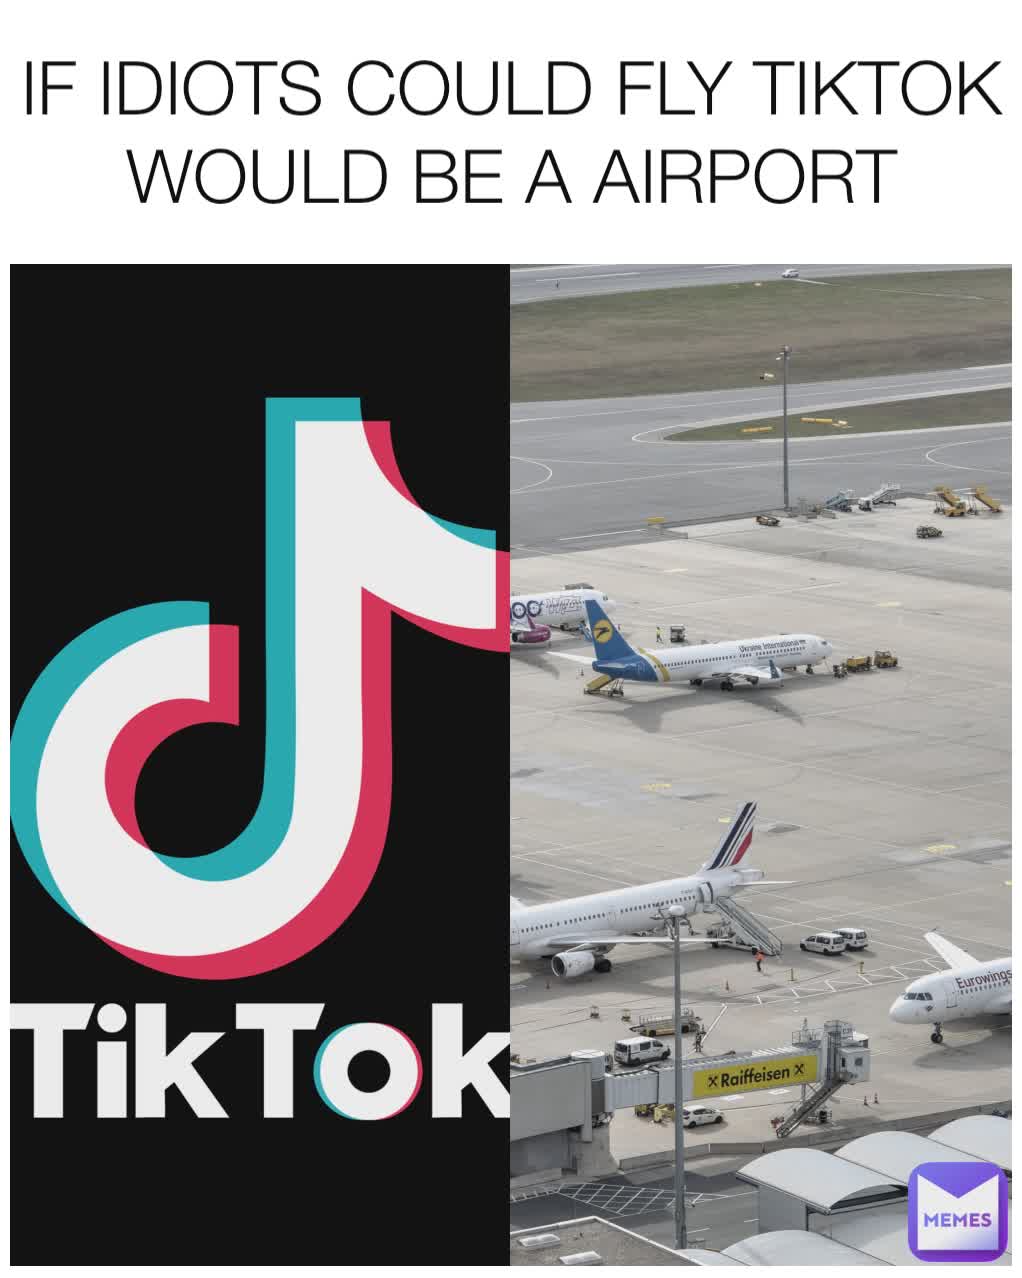 IF IDIOTS COULD FLY TIKTOK WOULD BE A AIRPORT